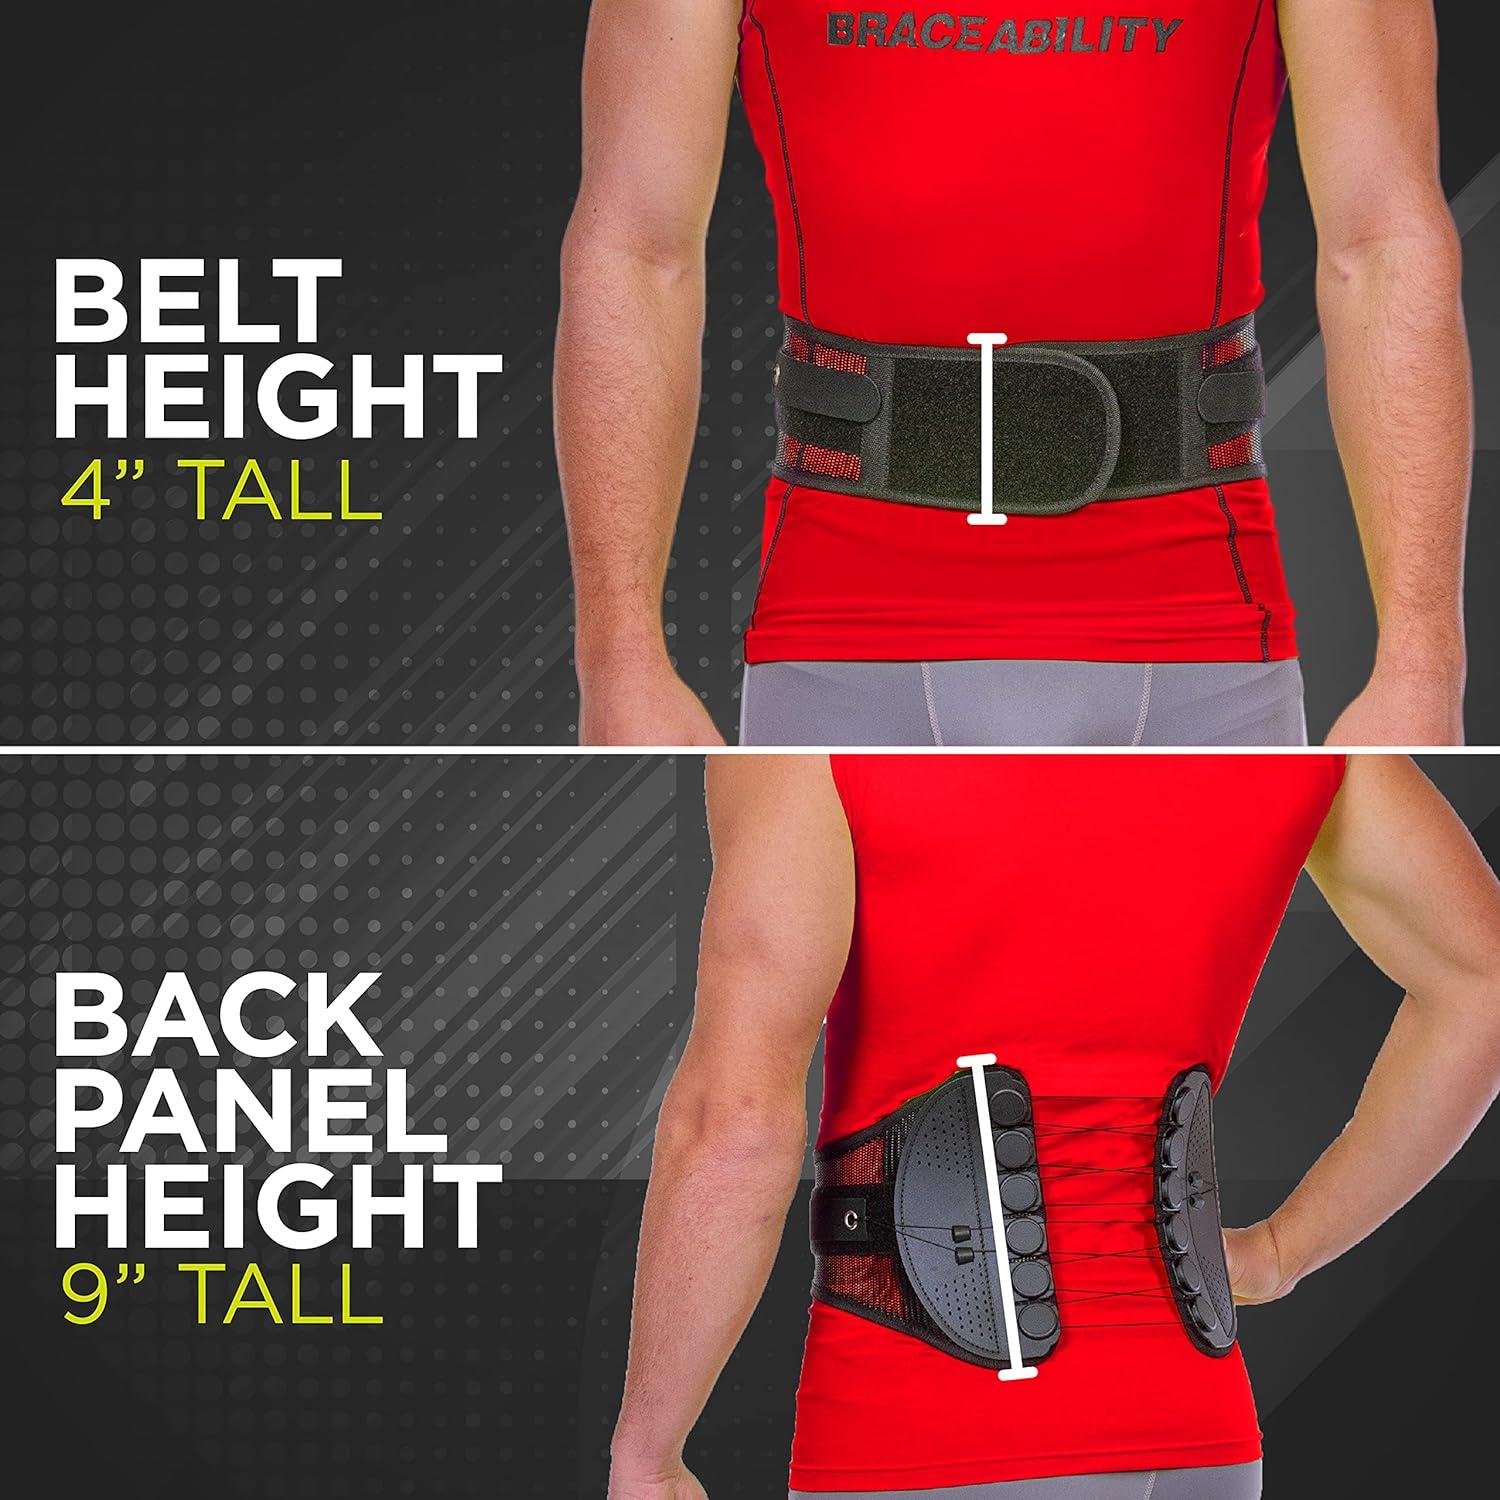 BraceAbility Spine Sport Back Brace - Athletic Men's and Women's Workout Lumbar  Corset for Exercising Running Golfing Driving Fishing Active Nurses and  Police Work (Medium) Medium (Pack of 1)